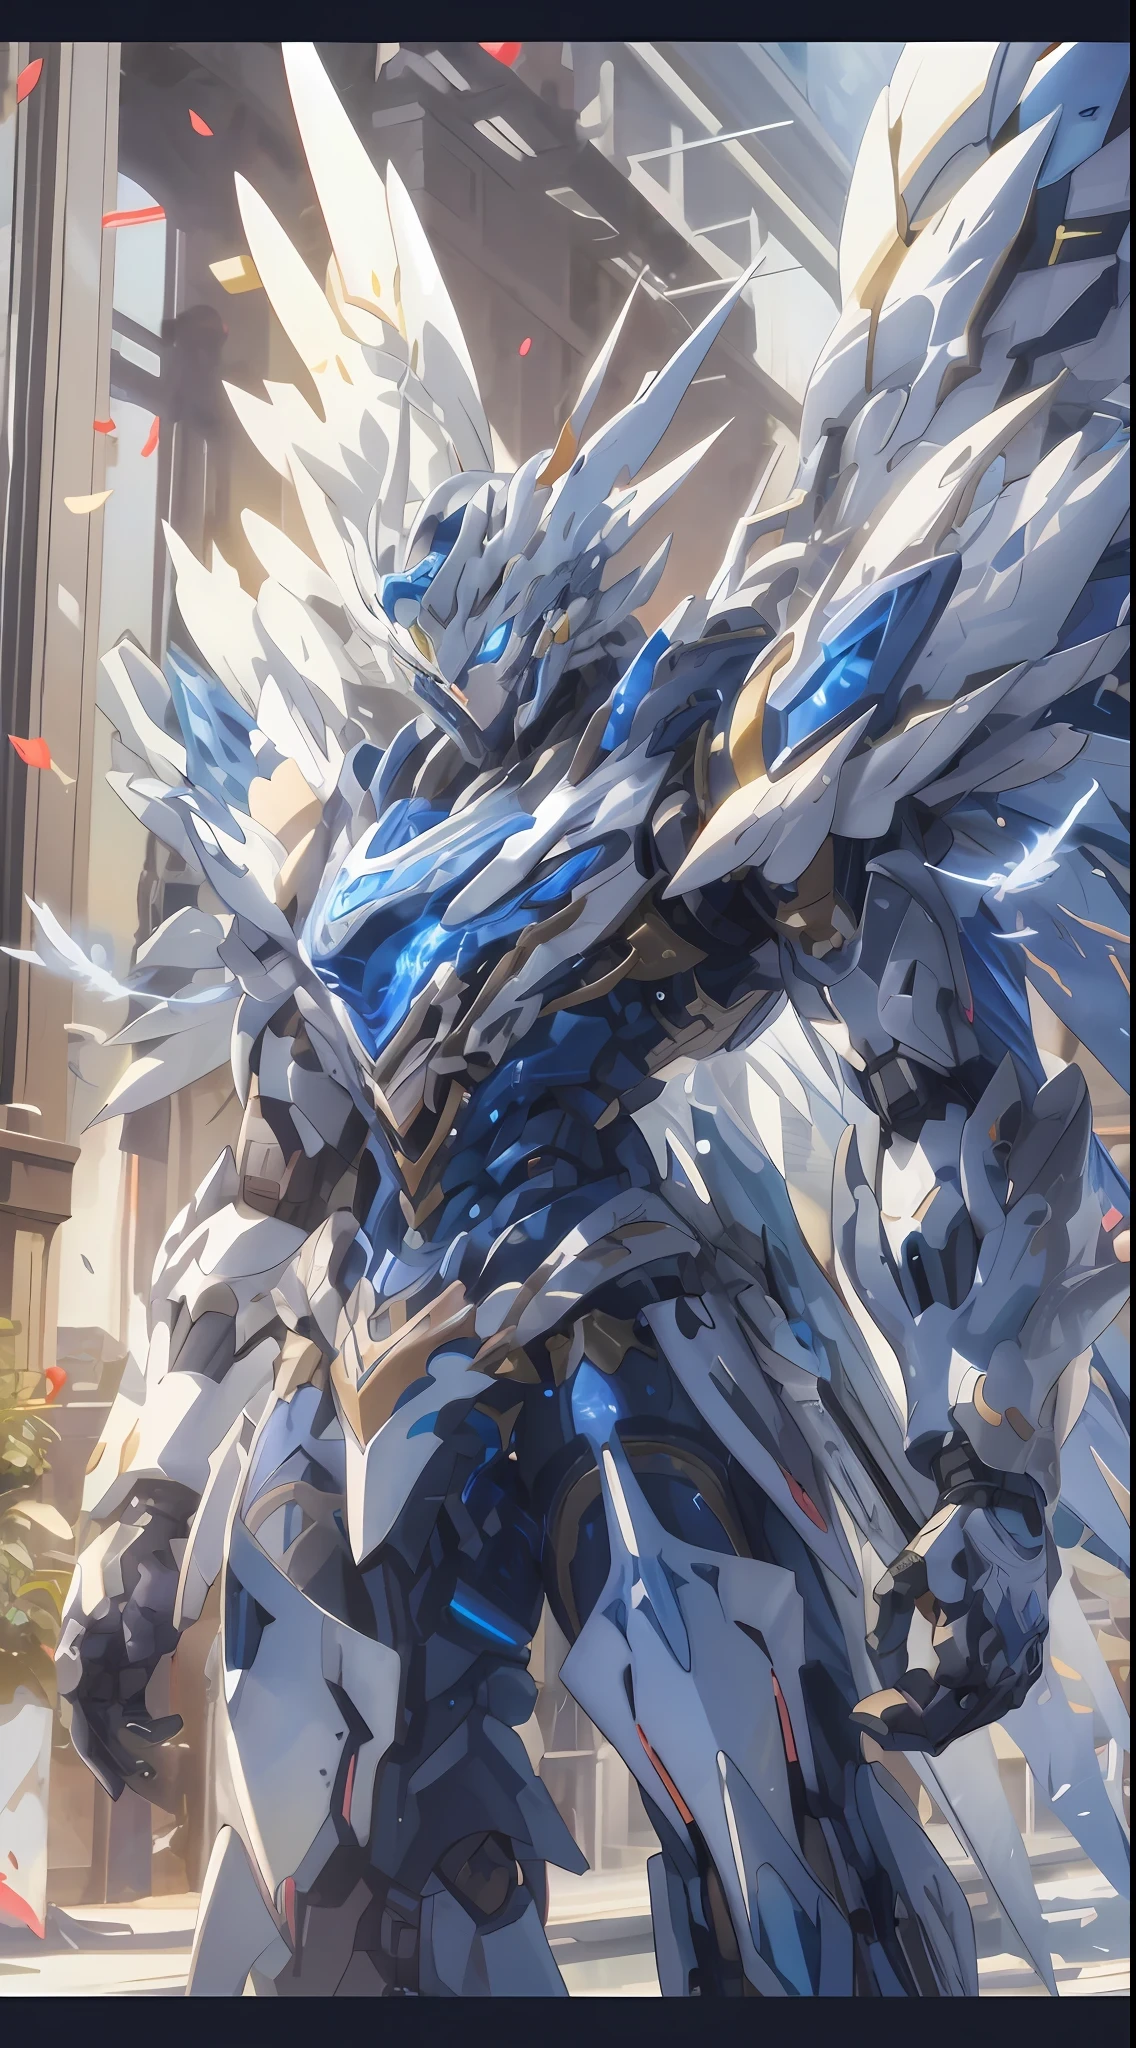 araffe robot with a blue and white body and wings, detailed anime artwork, detailed anime art, detailed digital anime art, sliver ice color reflected armor, detailed key anime art, advanced digital anime art, highly detailed anime, blue and ice silver color armor, intricate ornate anime cgi style, high detailed official artwork, 4k highly detailed digital art